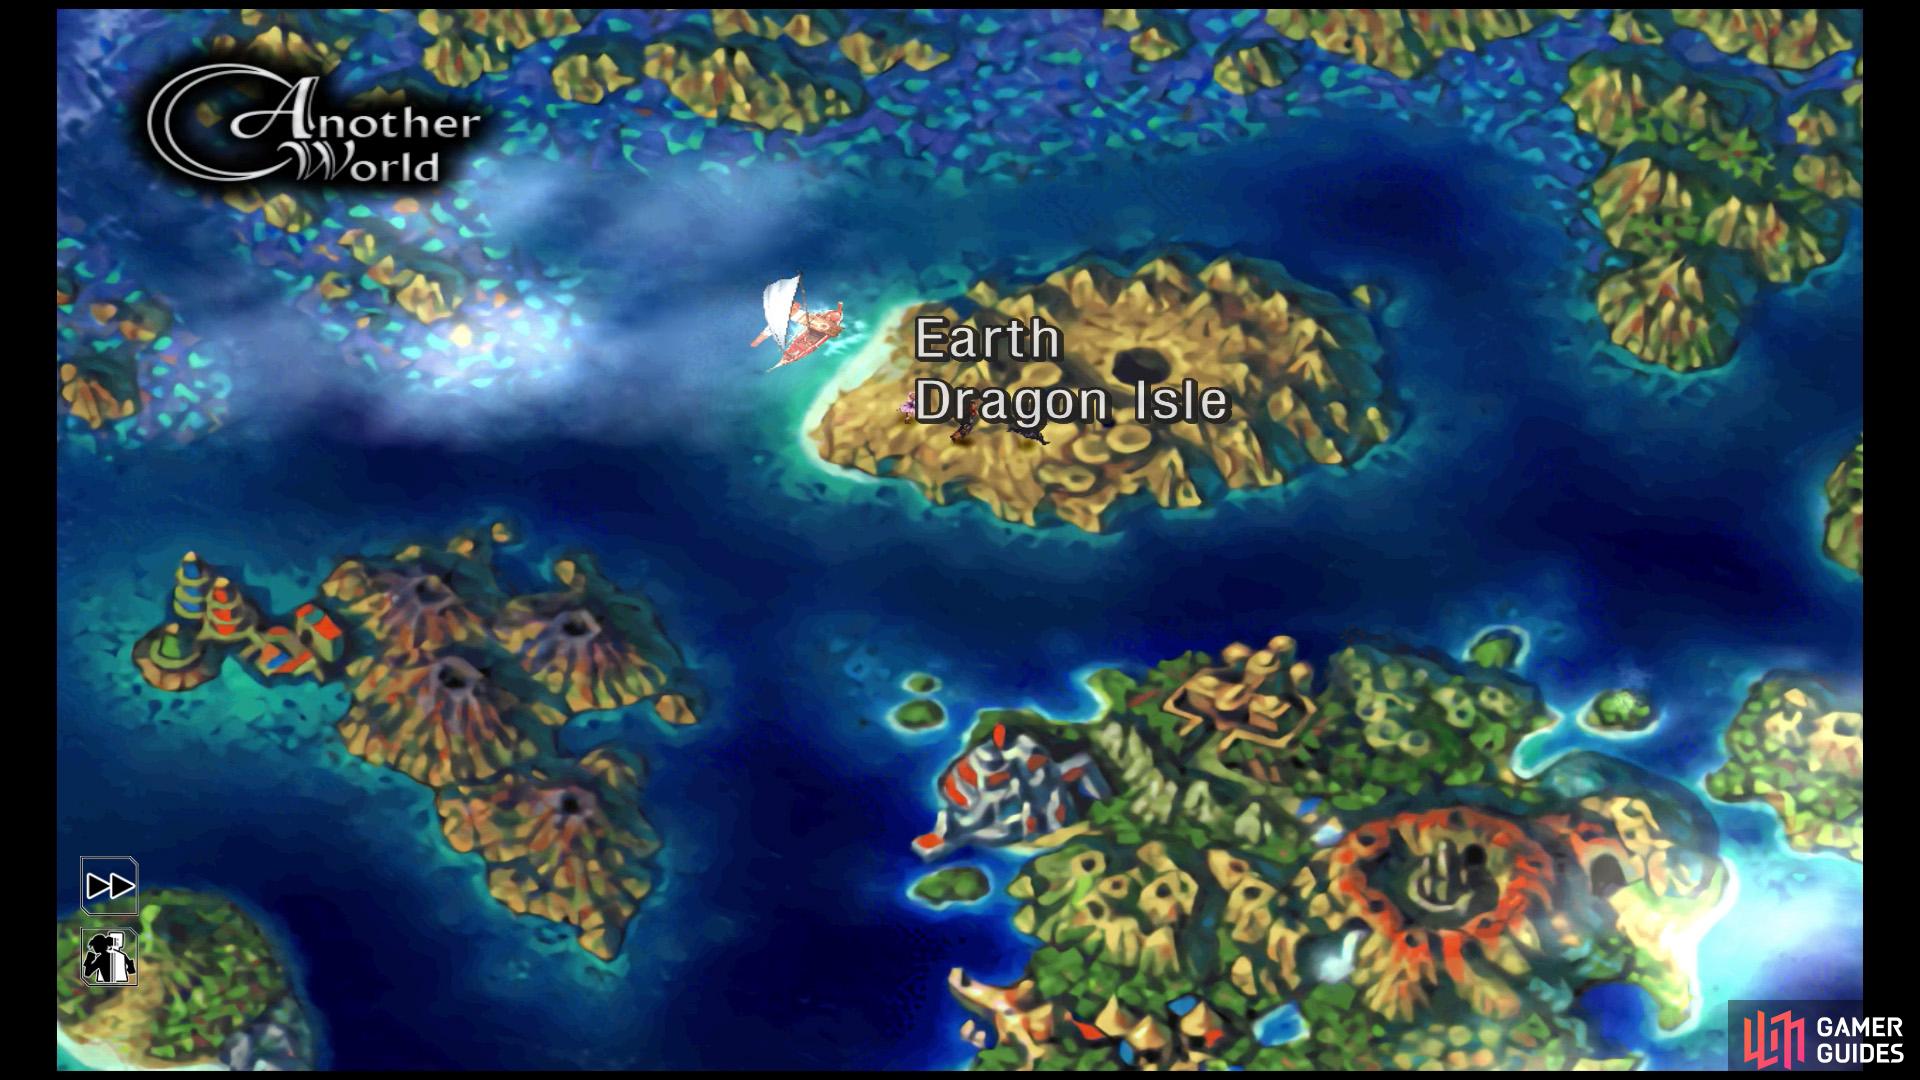 After (nearly) completing Earth Dragon isle in Home World, return to its Another World version.